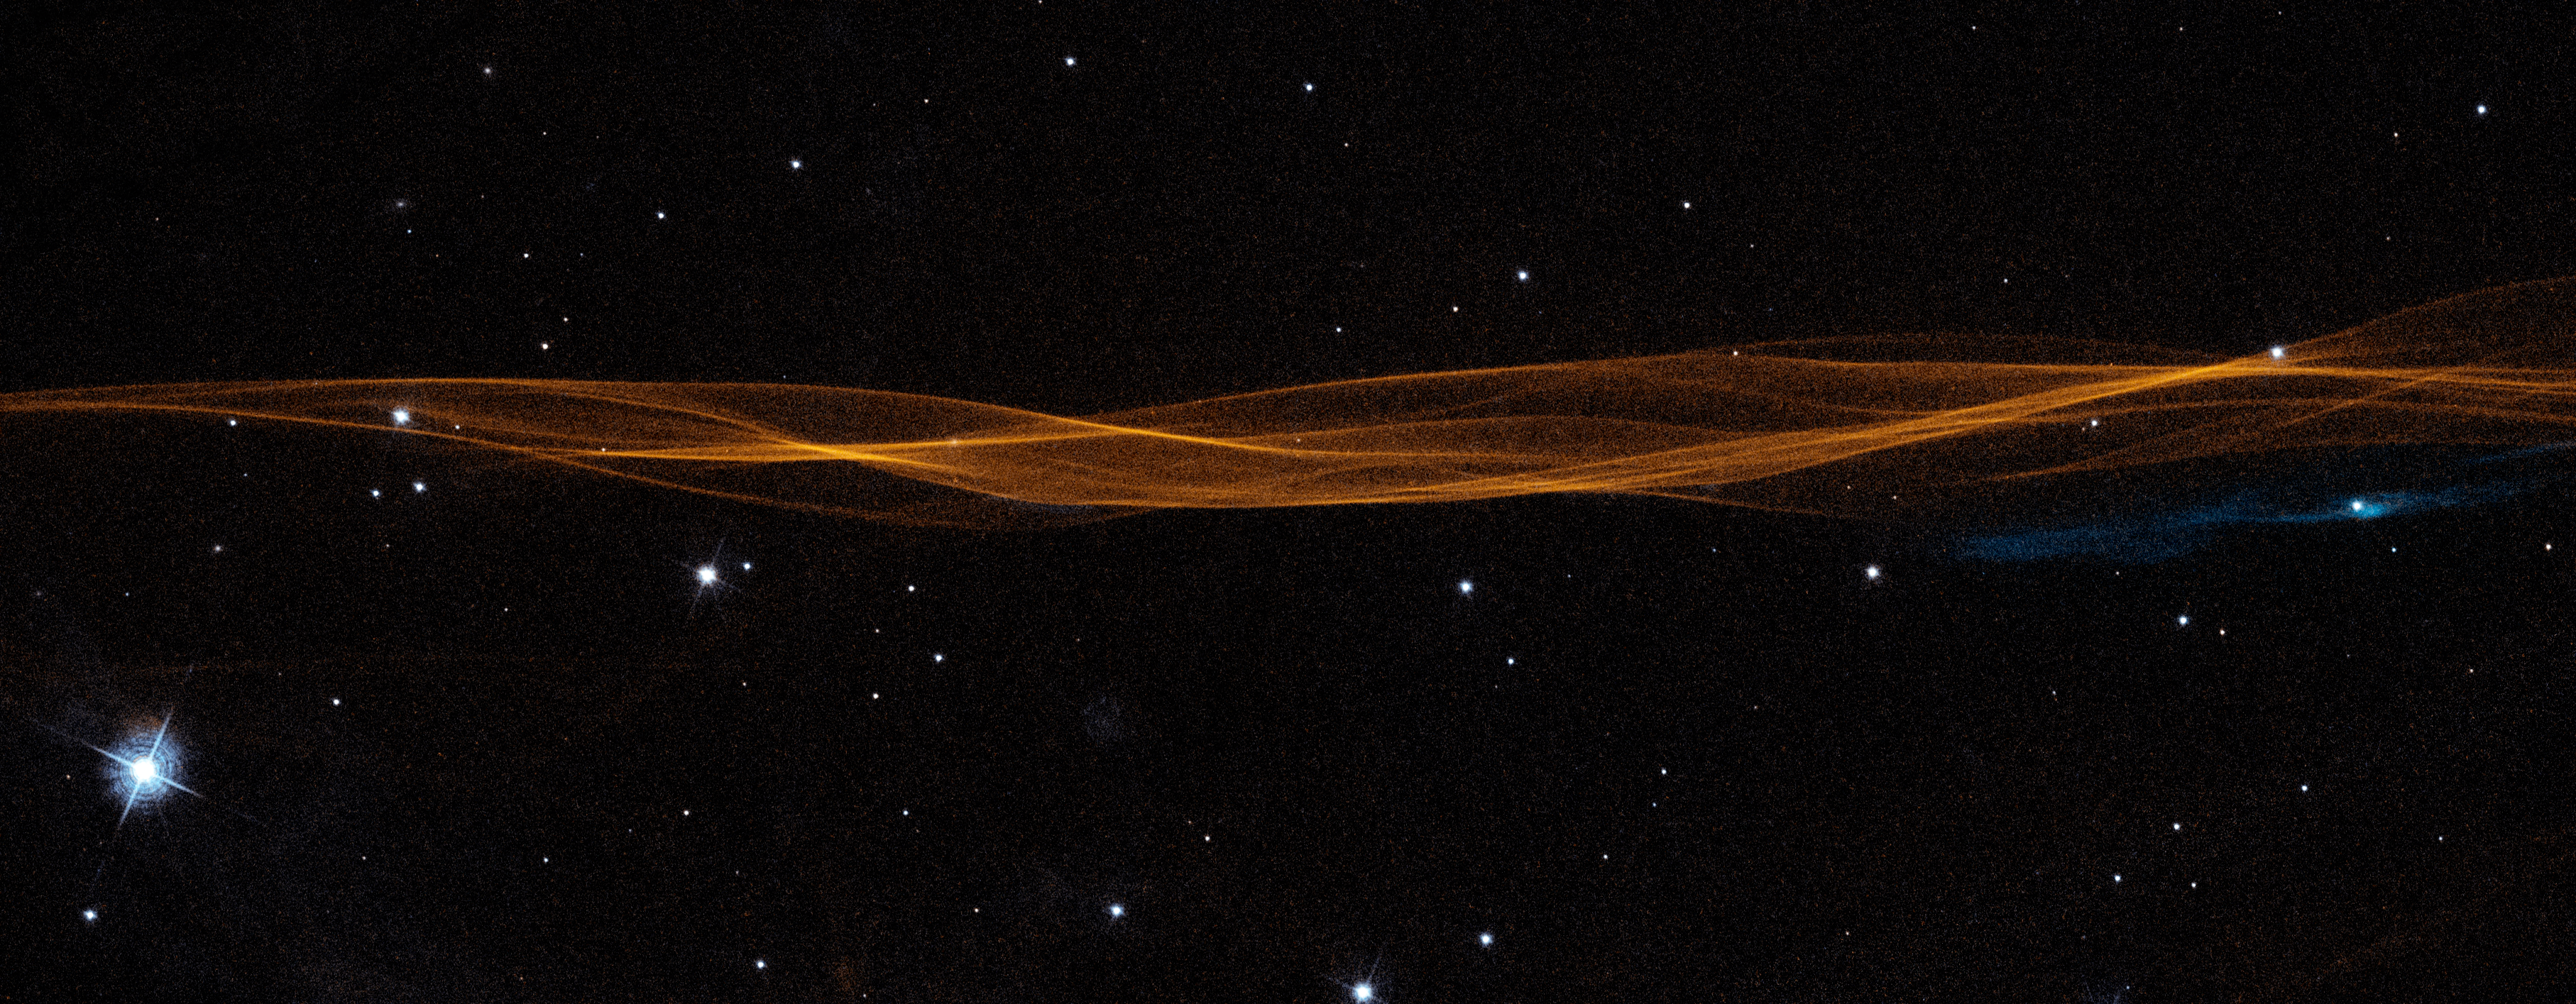 A long, thin, twisted ribbon of orange gas and dust stretches from left to right across the image. Bright-white stars dot the black background. One bright, blue-white star at bottom left. A small swath of blue gas stretches below the orange ribbon on the right side.